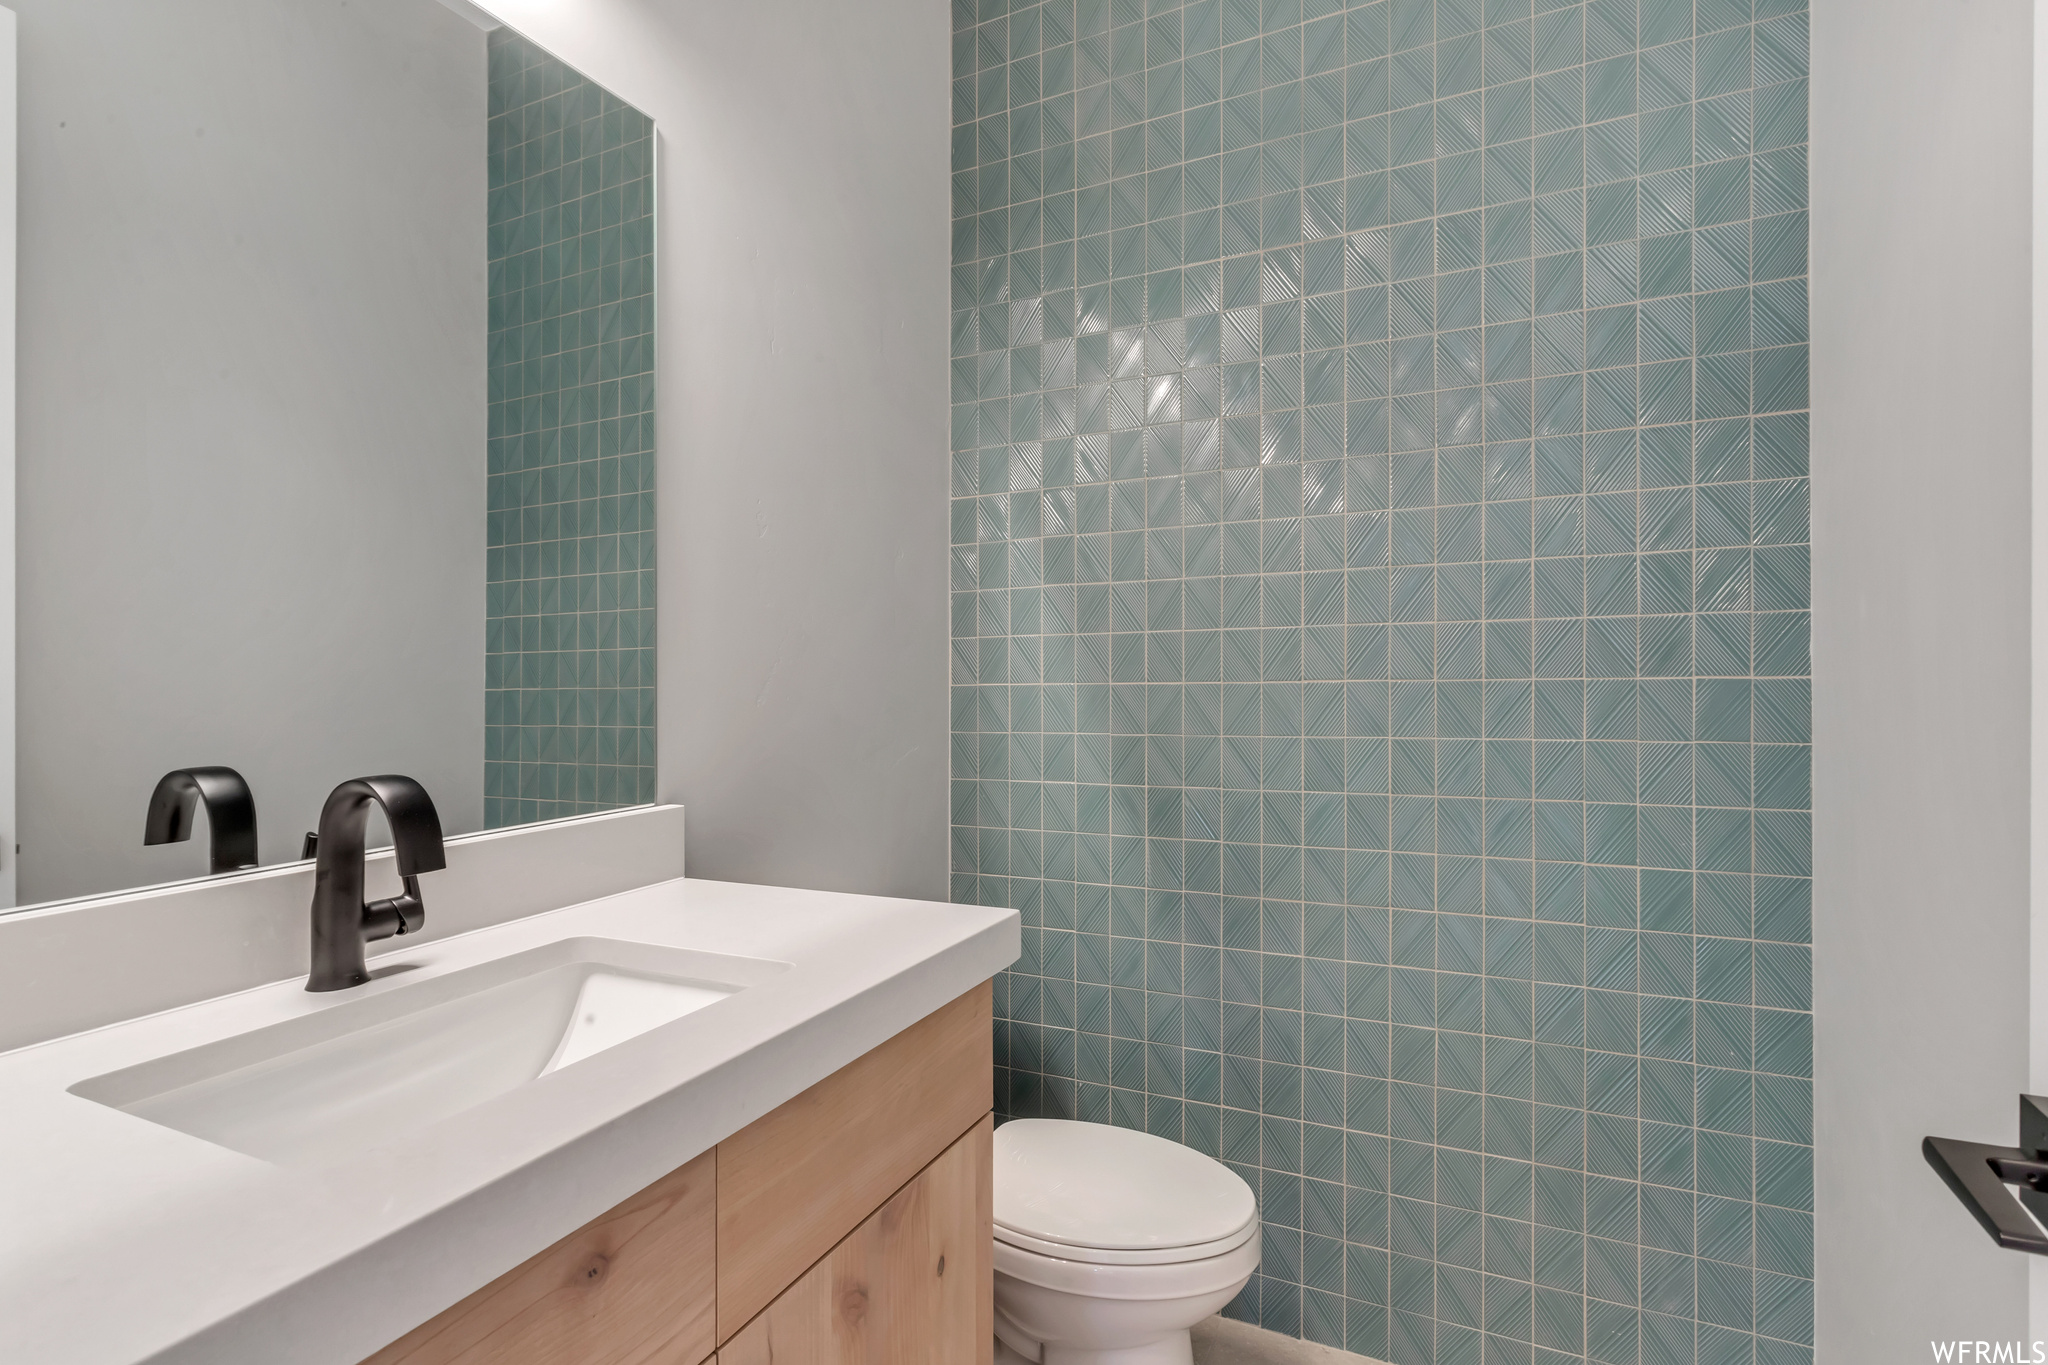 This half bath features specialty tile chosen by the homeowner